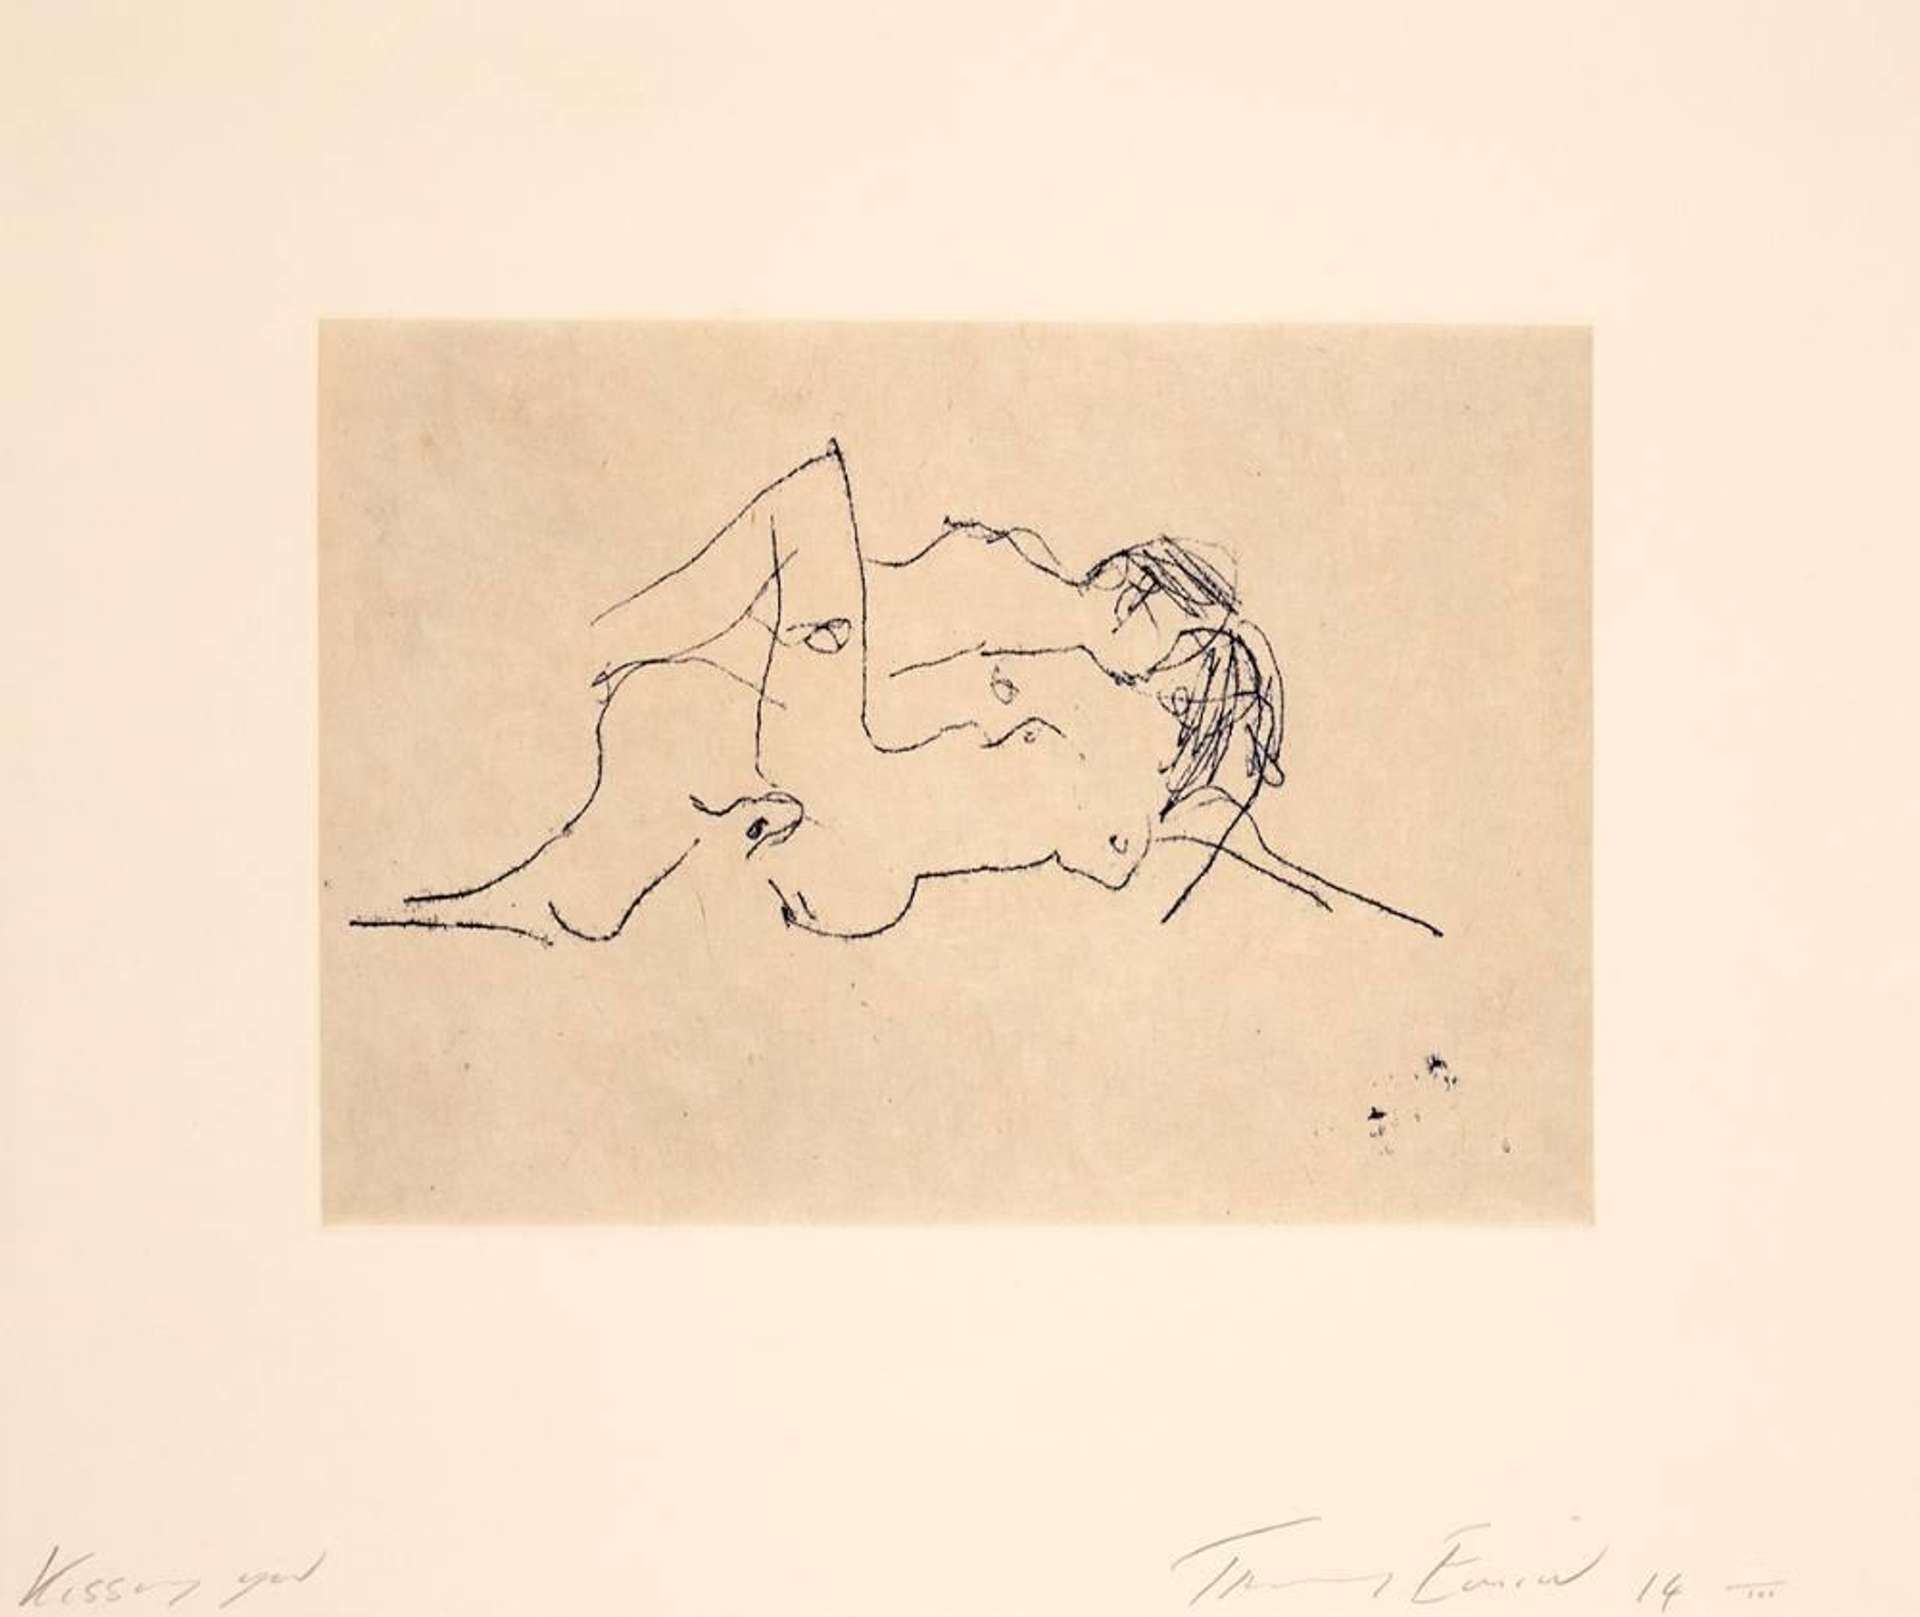 Tracey Emin’s Kissing You. A print of a sketch of a man and woman kissing and engaging in intercourse. 